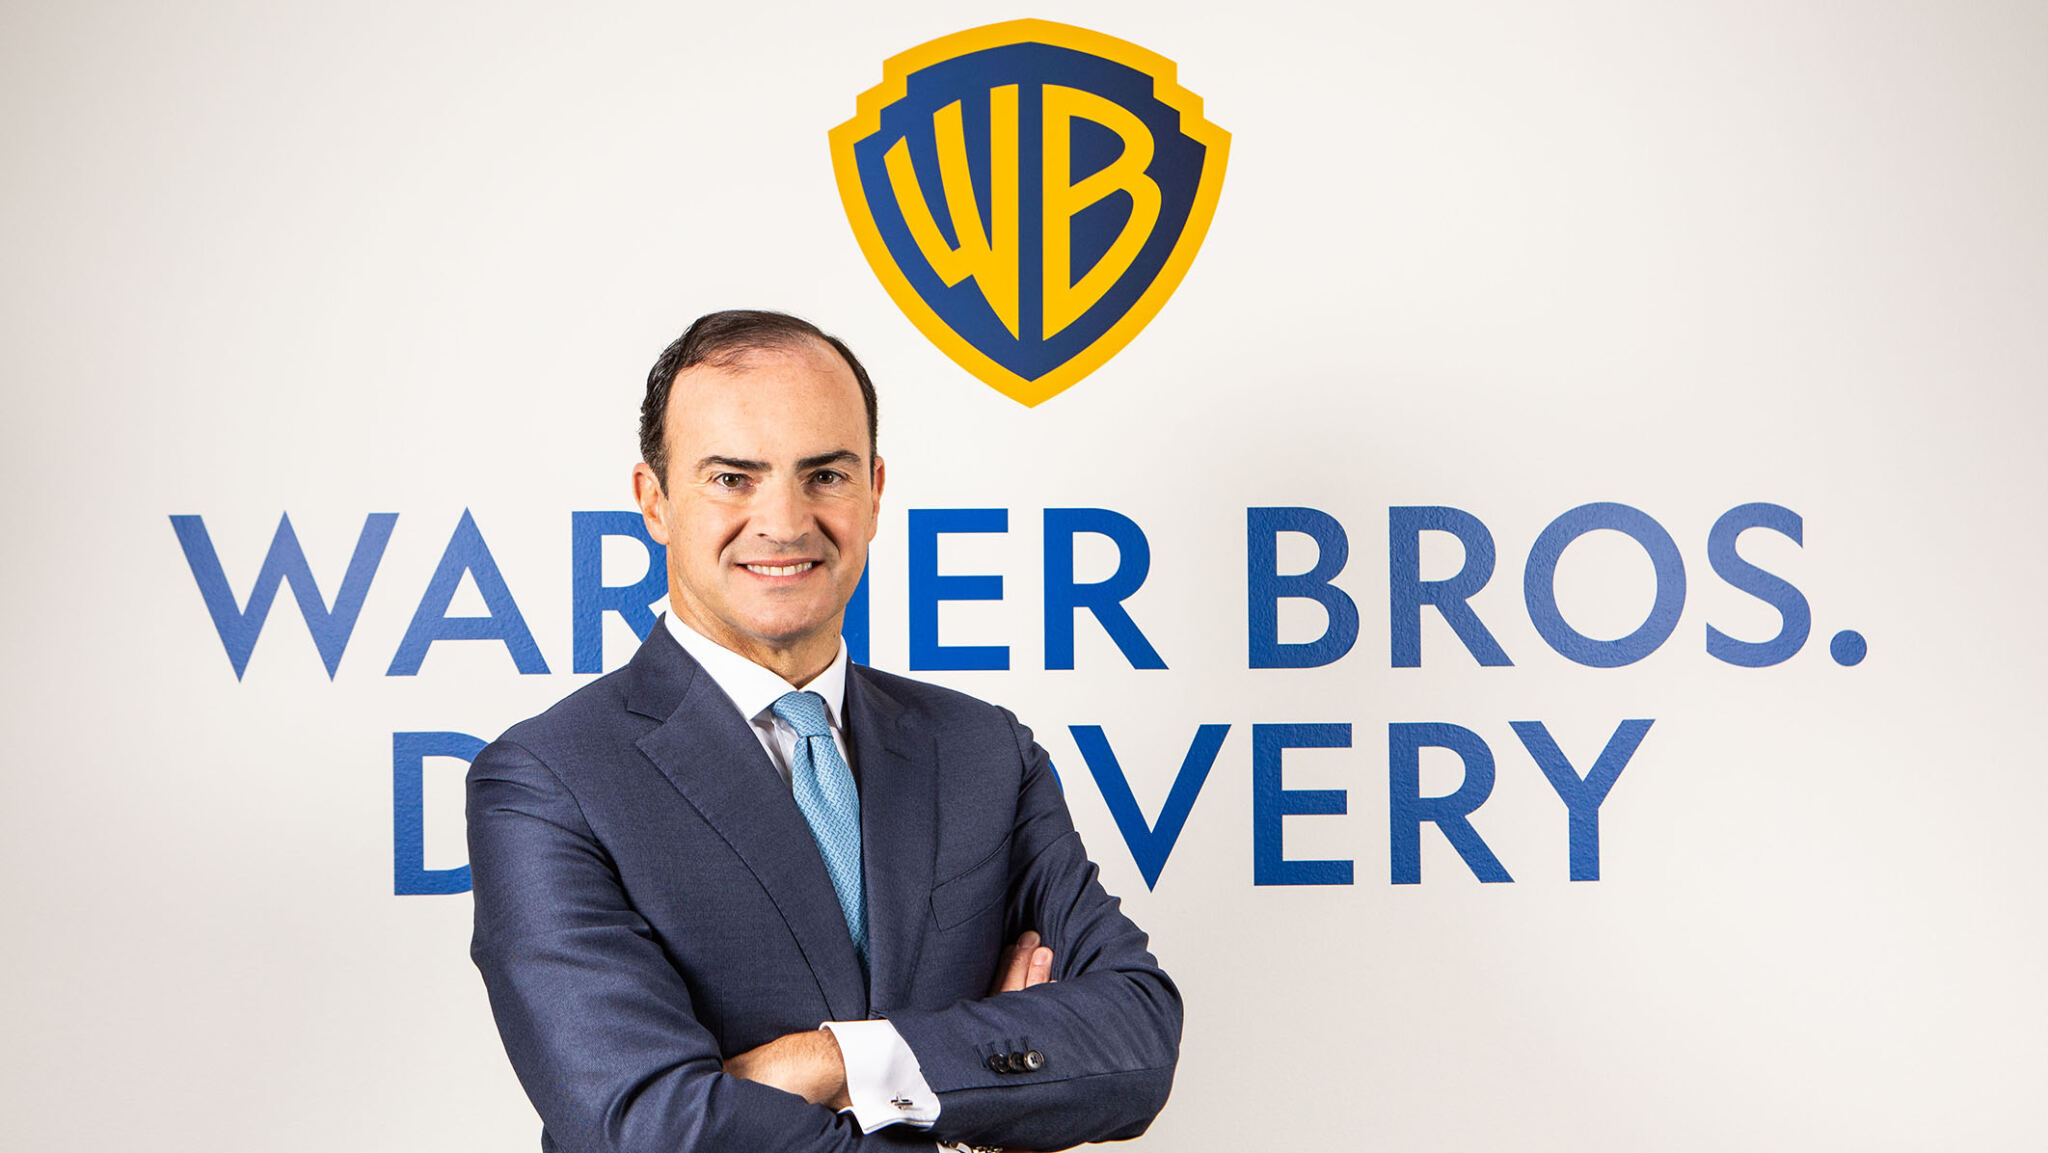 Strengthened partnership between Sky and Warner Bros. Discovery